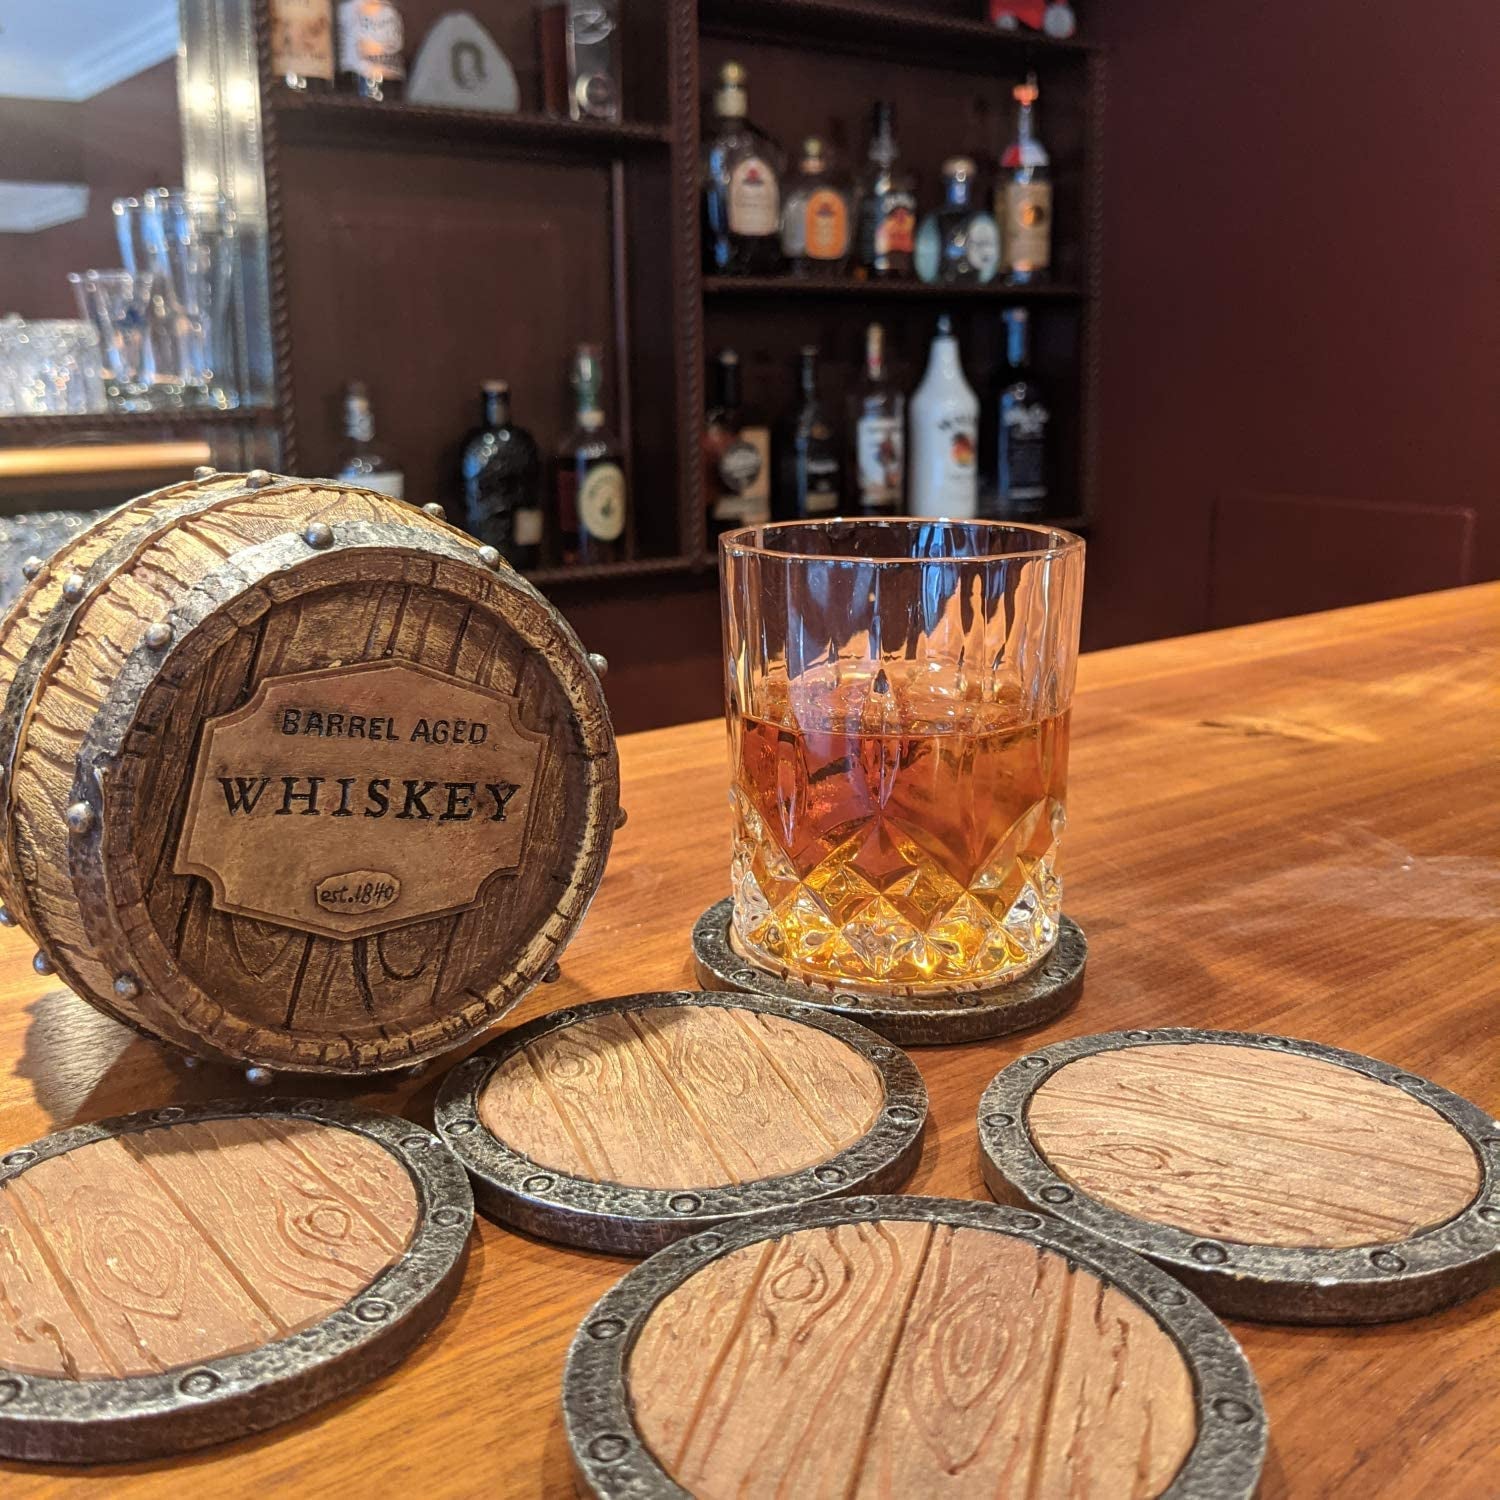 5Pc Whiskey Bourbon Barrel Drink Coasters, Unique Bar Decor & Accessories, Beer & Whiskey Glass Coaster - Home Decorations for Dining Room or Home Bar - Modern Coaster Set with Holder for Man Cave